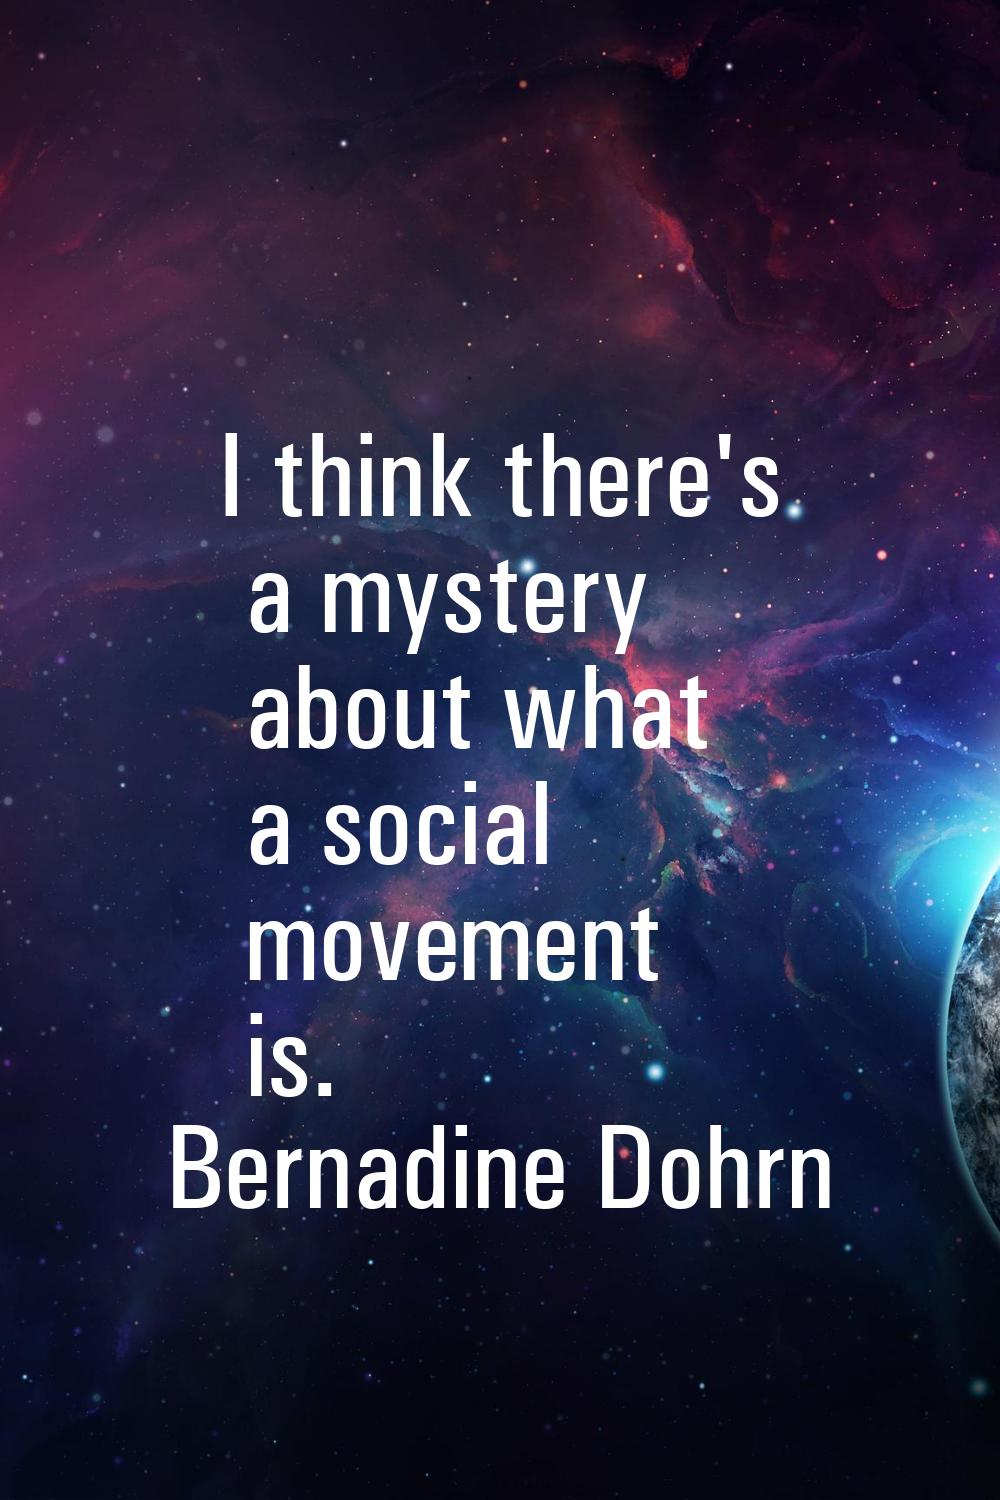 I think there's a mystery about what a social movement is.